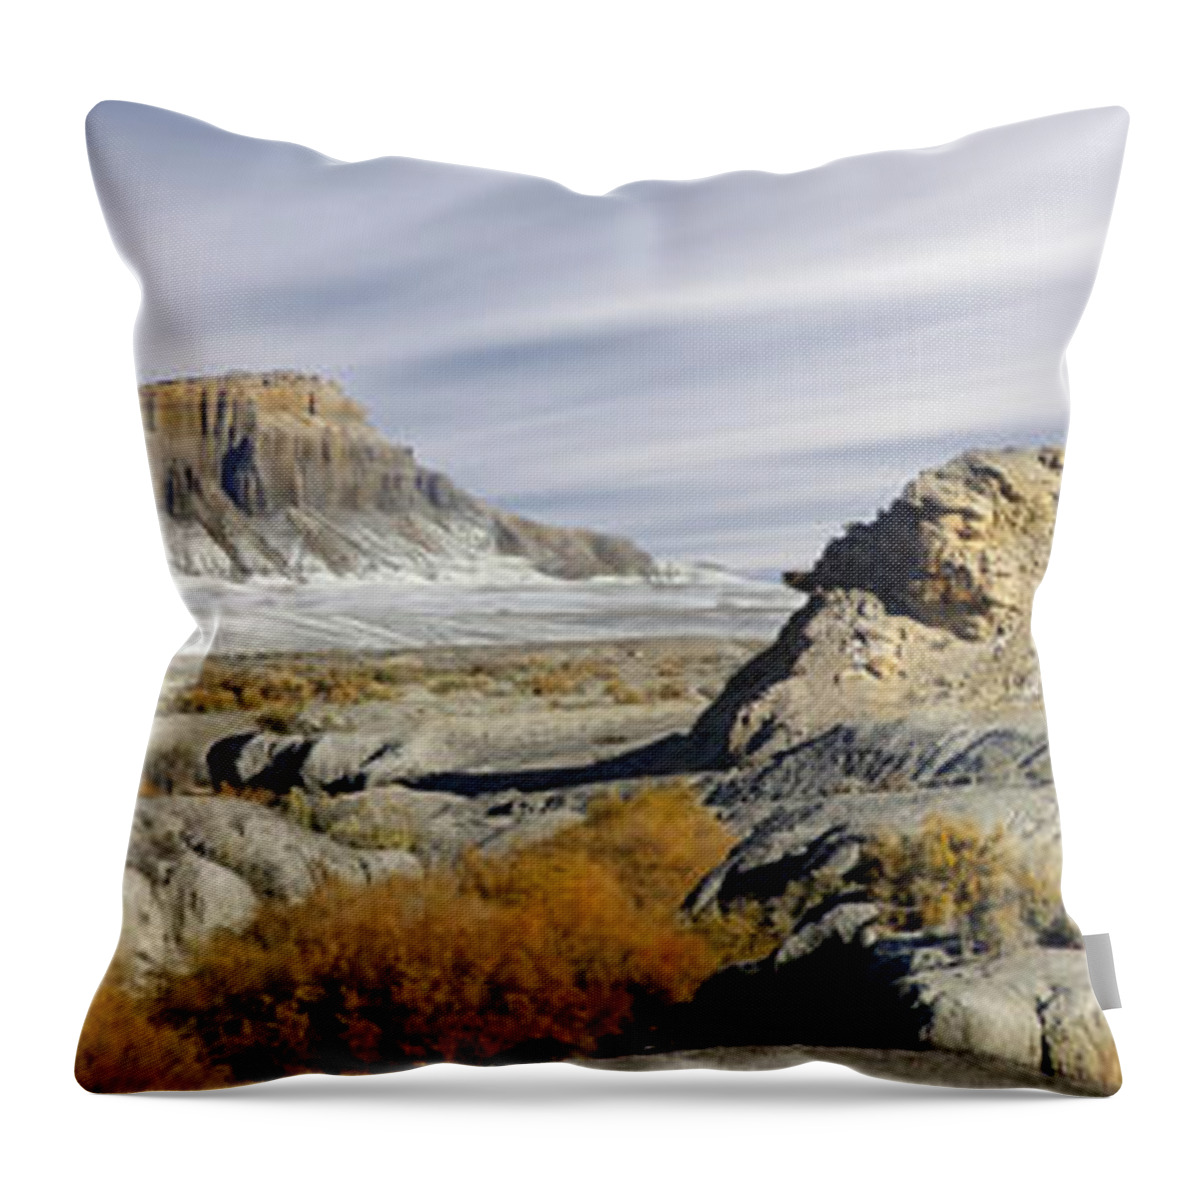 Desert Throw Pillow featuring the photograph Utah Outback 43 Panoramic by Mike McGlothlen